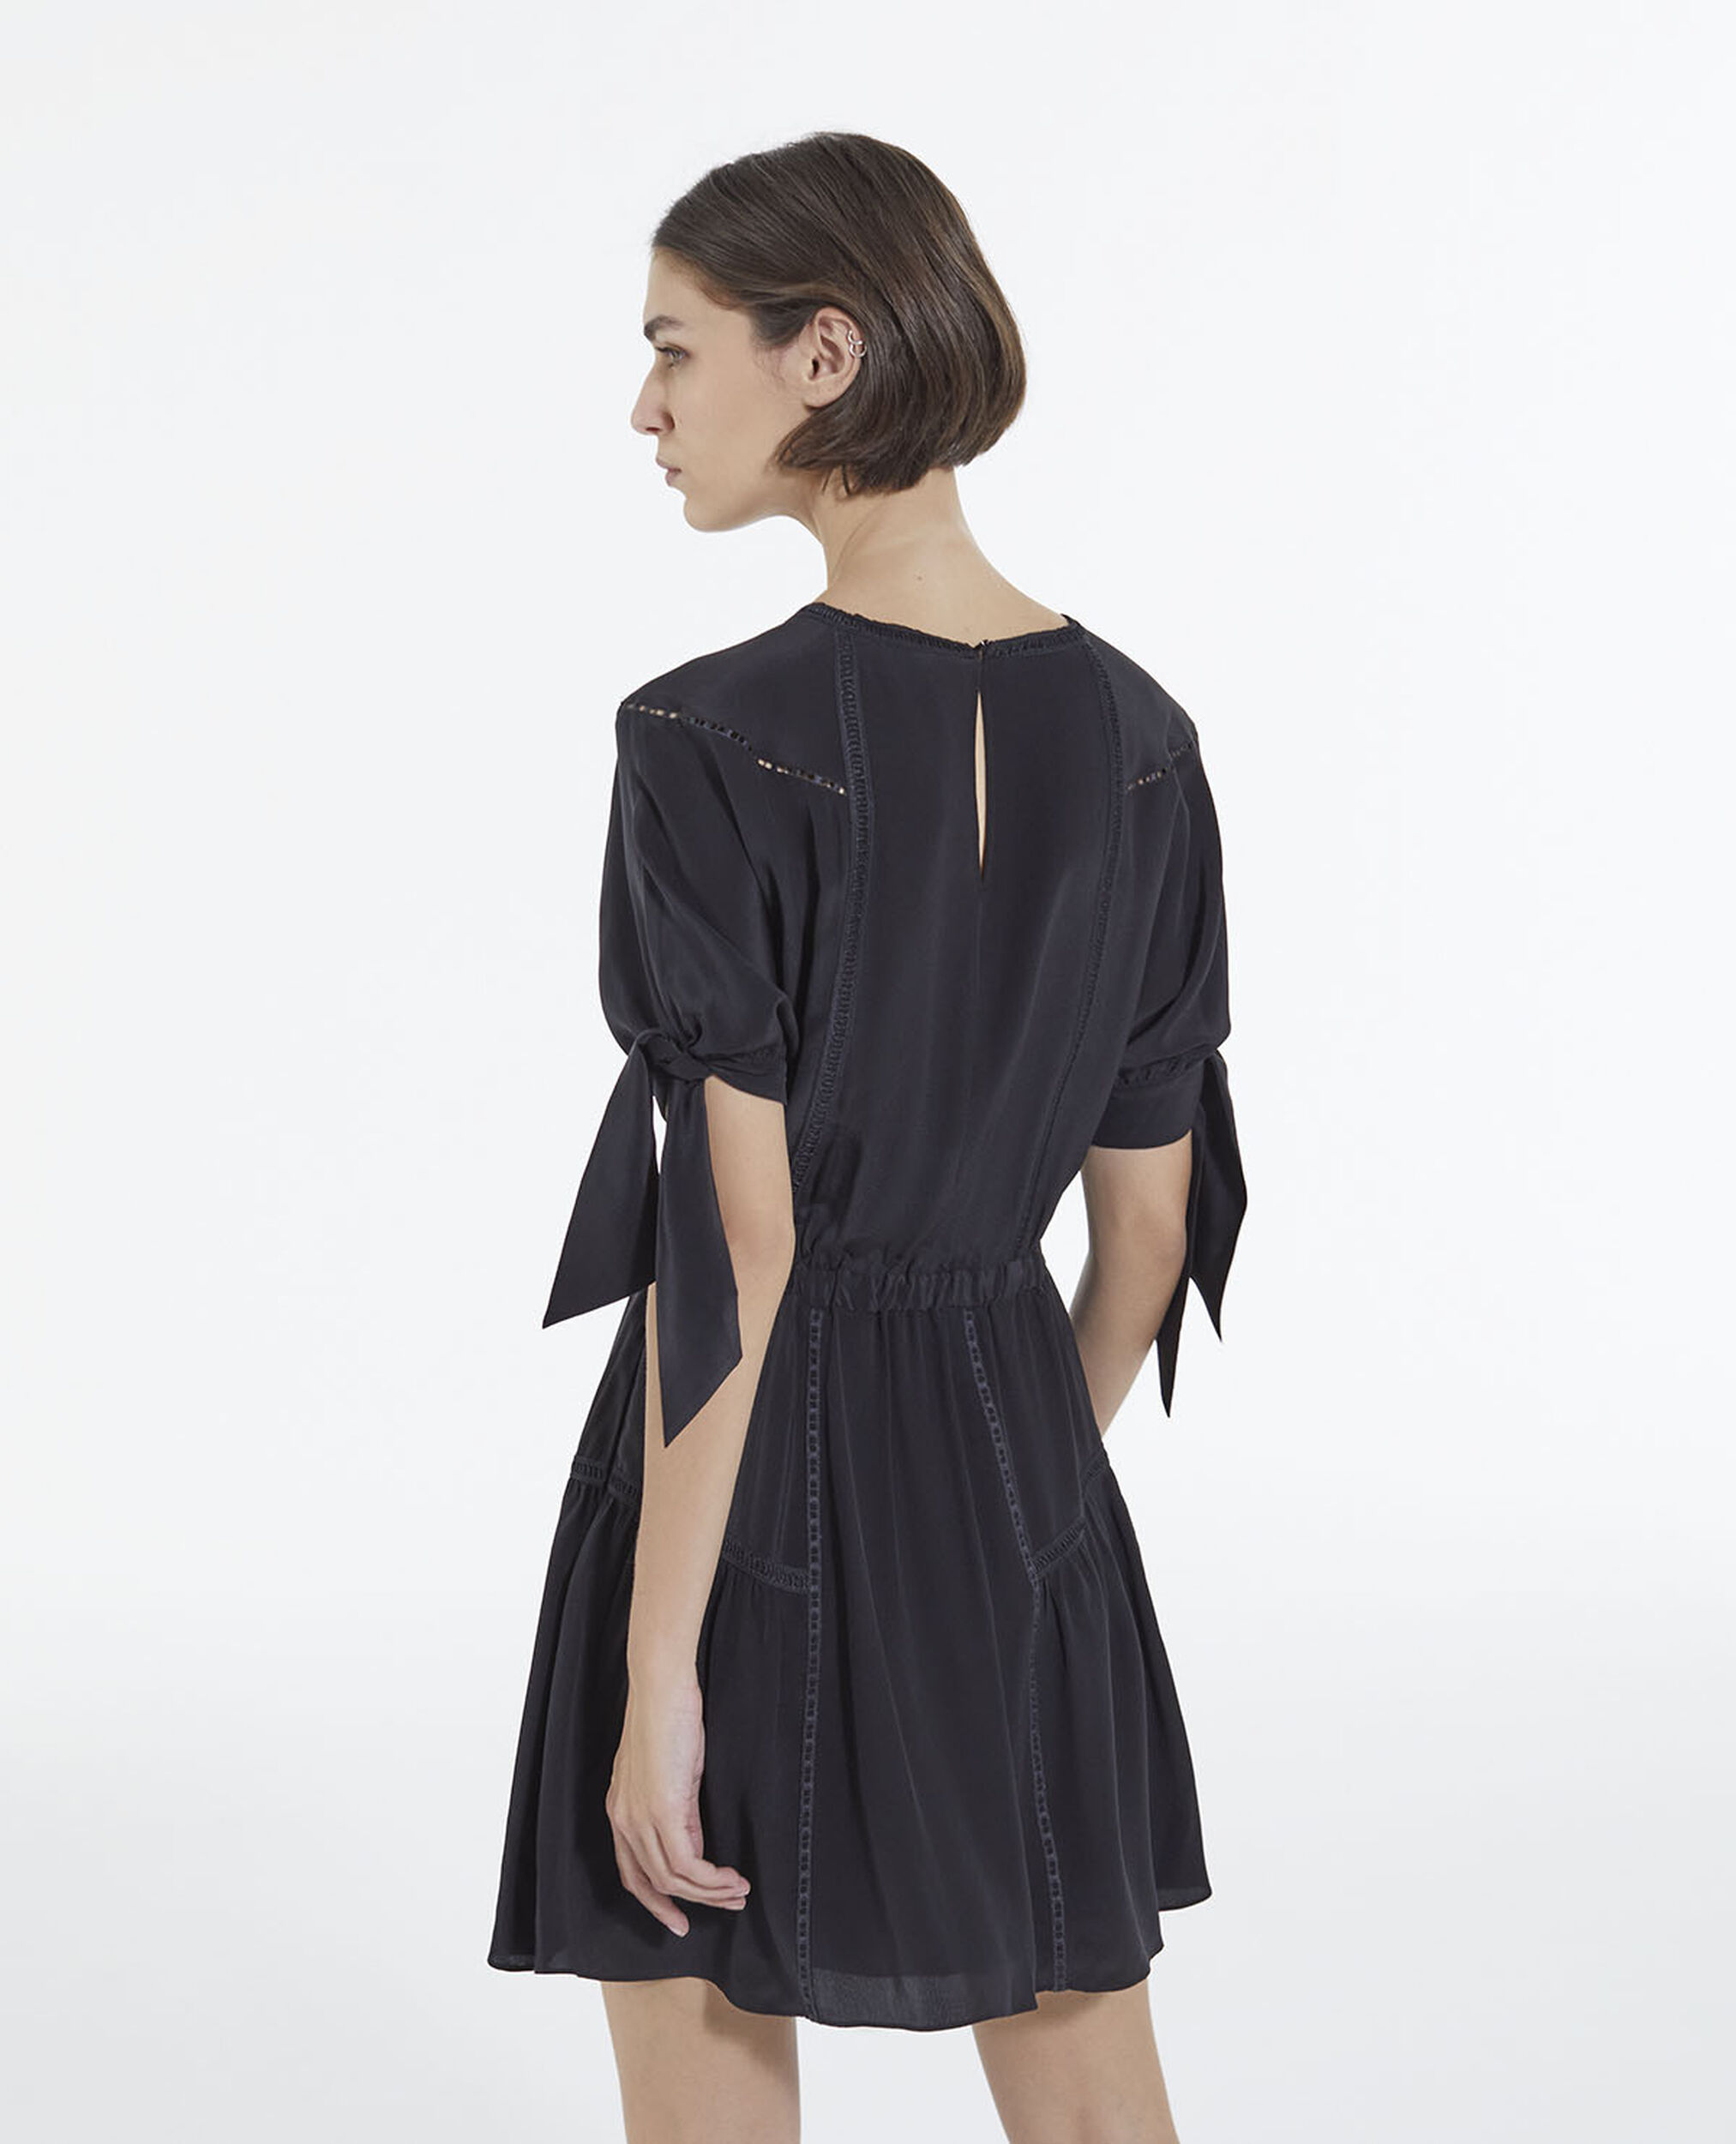 The | dress knotted sleeves Kooples Short with silk black